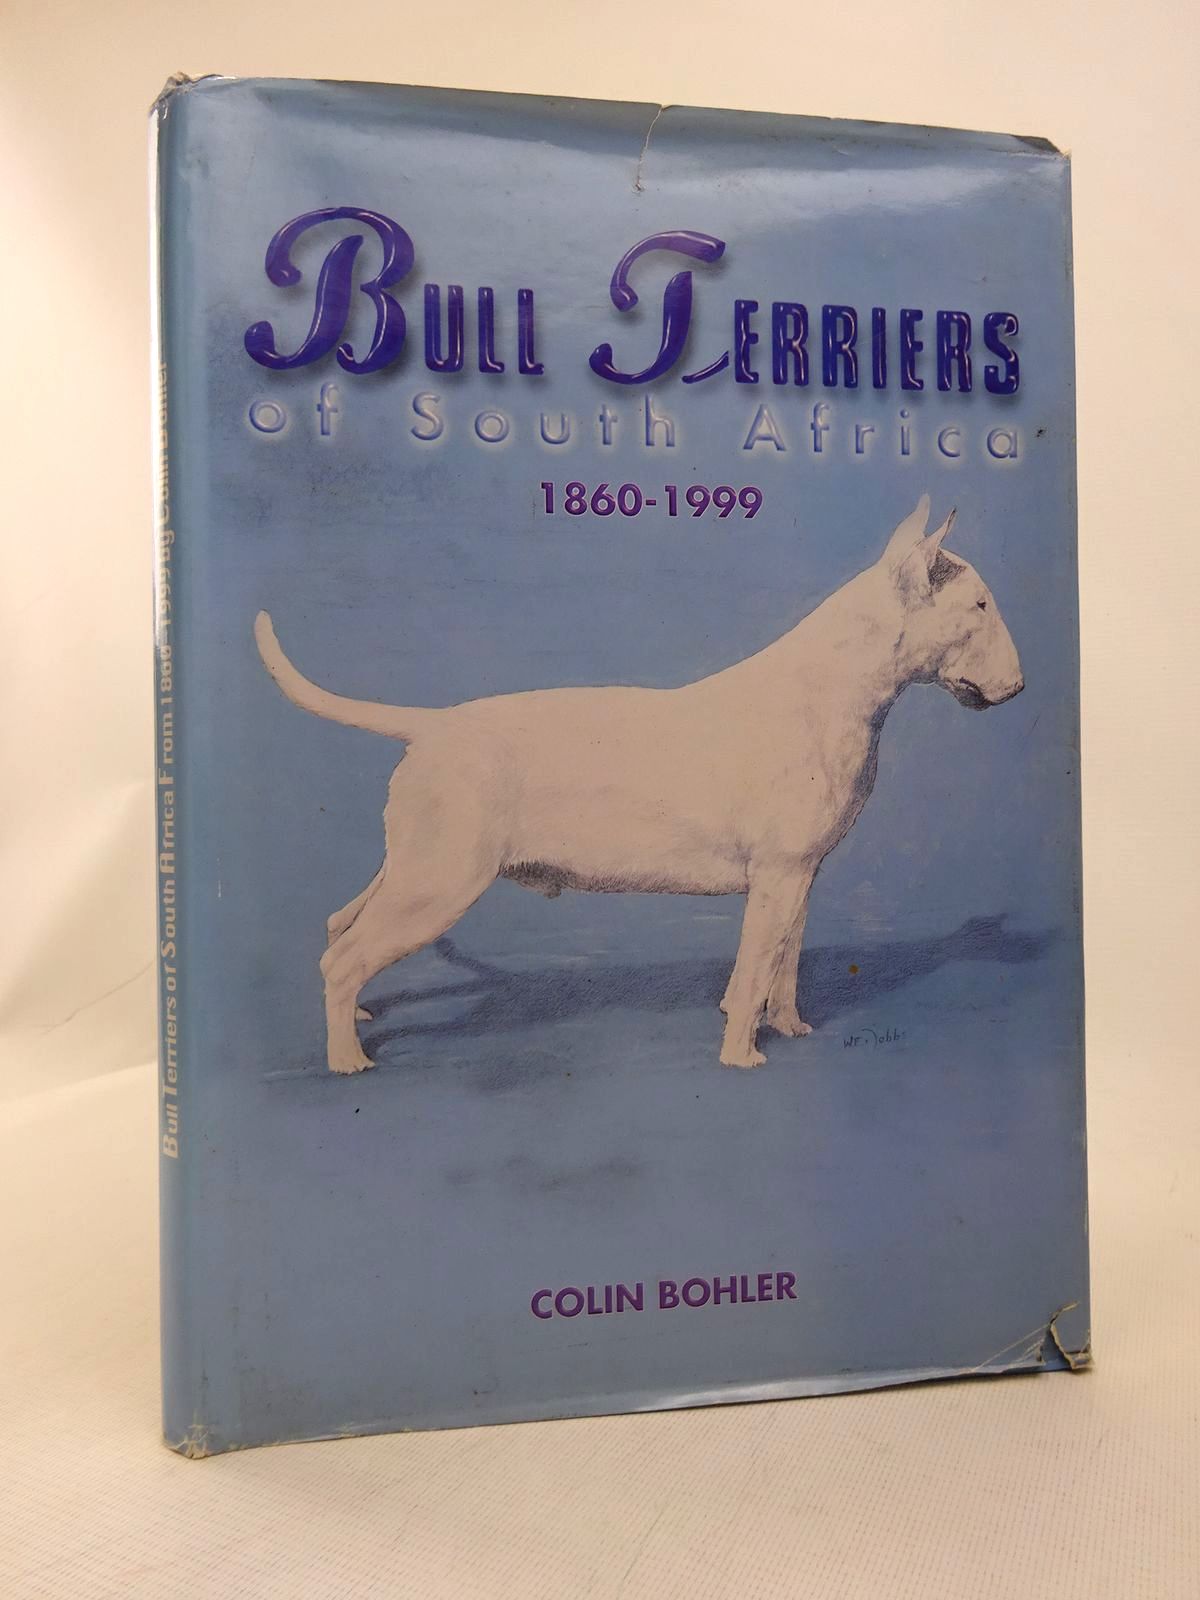 Photo of BULL TERRIERS OF SOUTH AFRICA 1860-1999 written by Bohler, Colin published by Sarah Bohler (STOCK CODE: 1816782)  for sale by Stella & Rose's Books